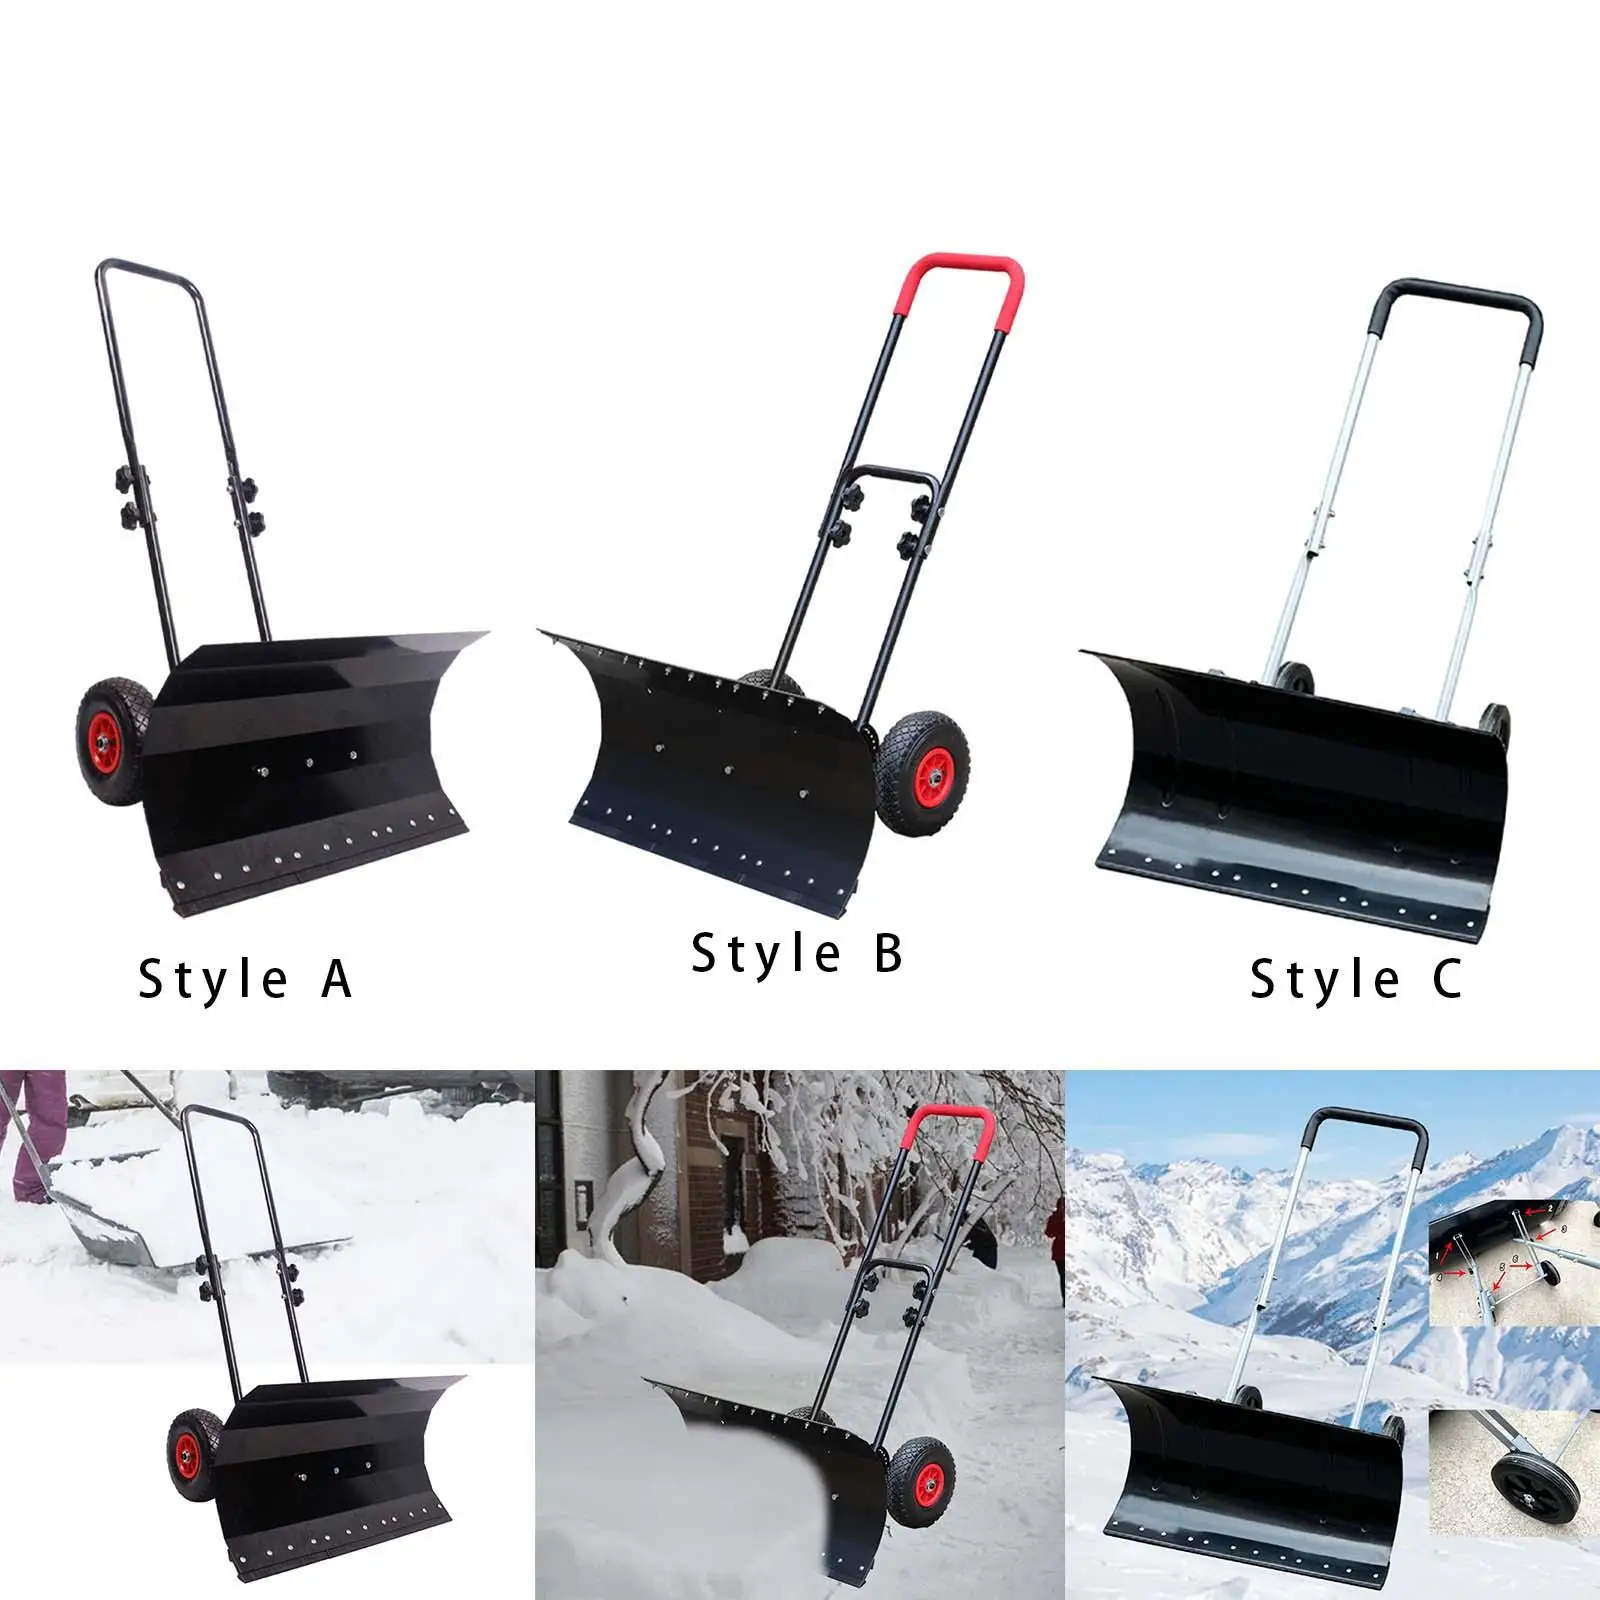 Snow Cleaning Wheeled Snow Plow Adjustable Handle Snow Puller Sturdy Snow Pusher Removal Tool for Winter Lawn Sidewalk Deck